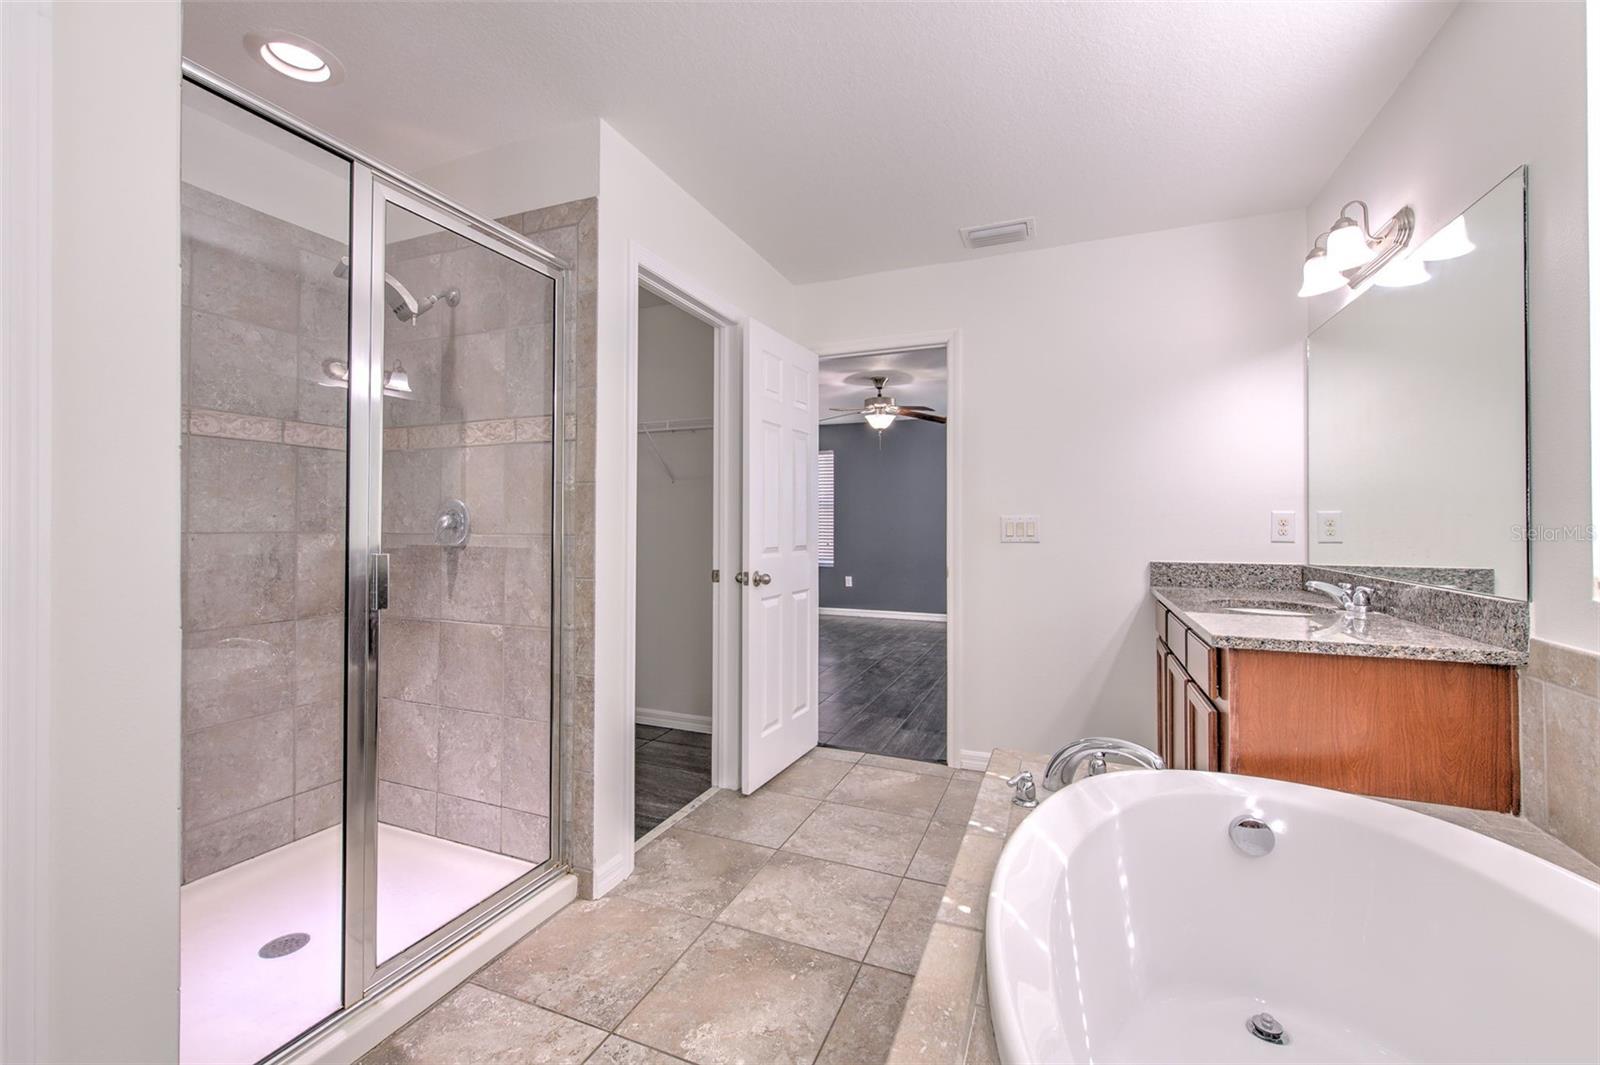 Both primary bathrooms include shower, garden tub, and dual vanity with granite counters.